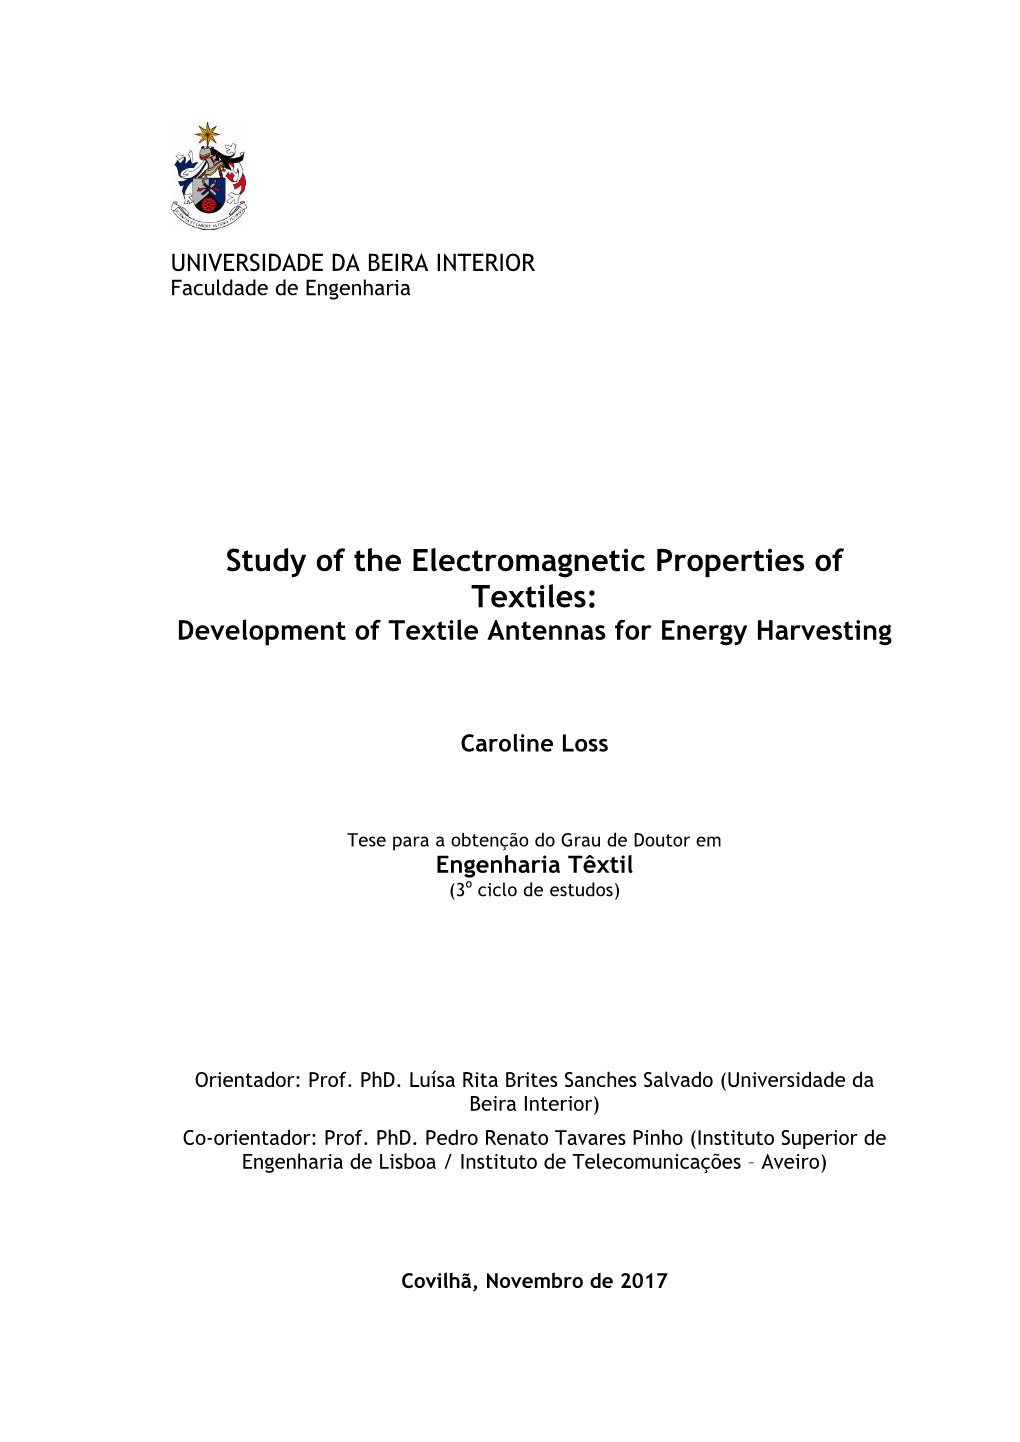 Study of the Electromagnetic Properties of Textiles: Development of Textile Antennas for Energy Harvesting